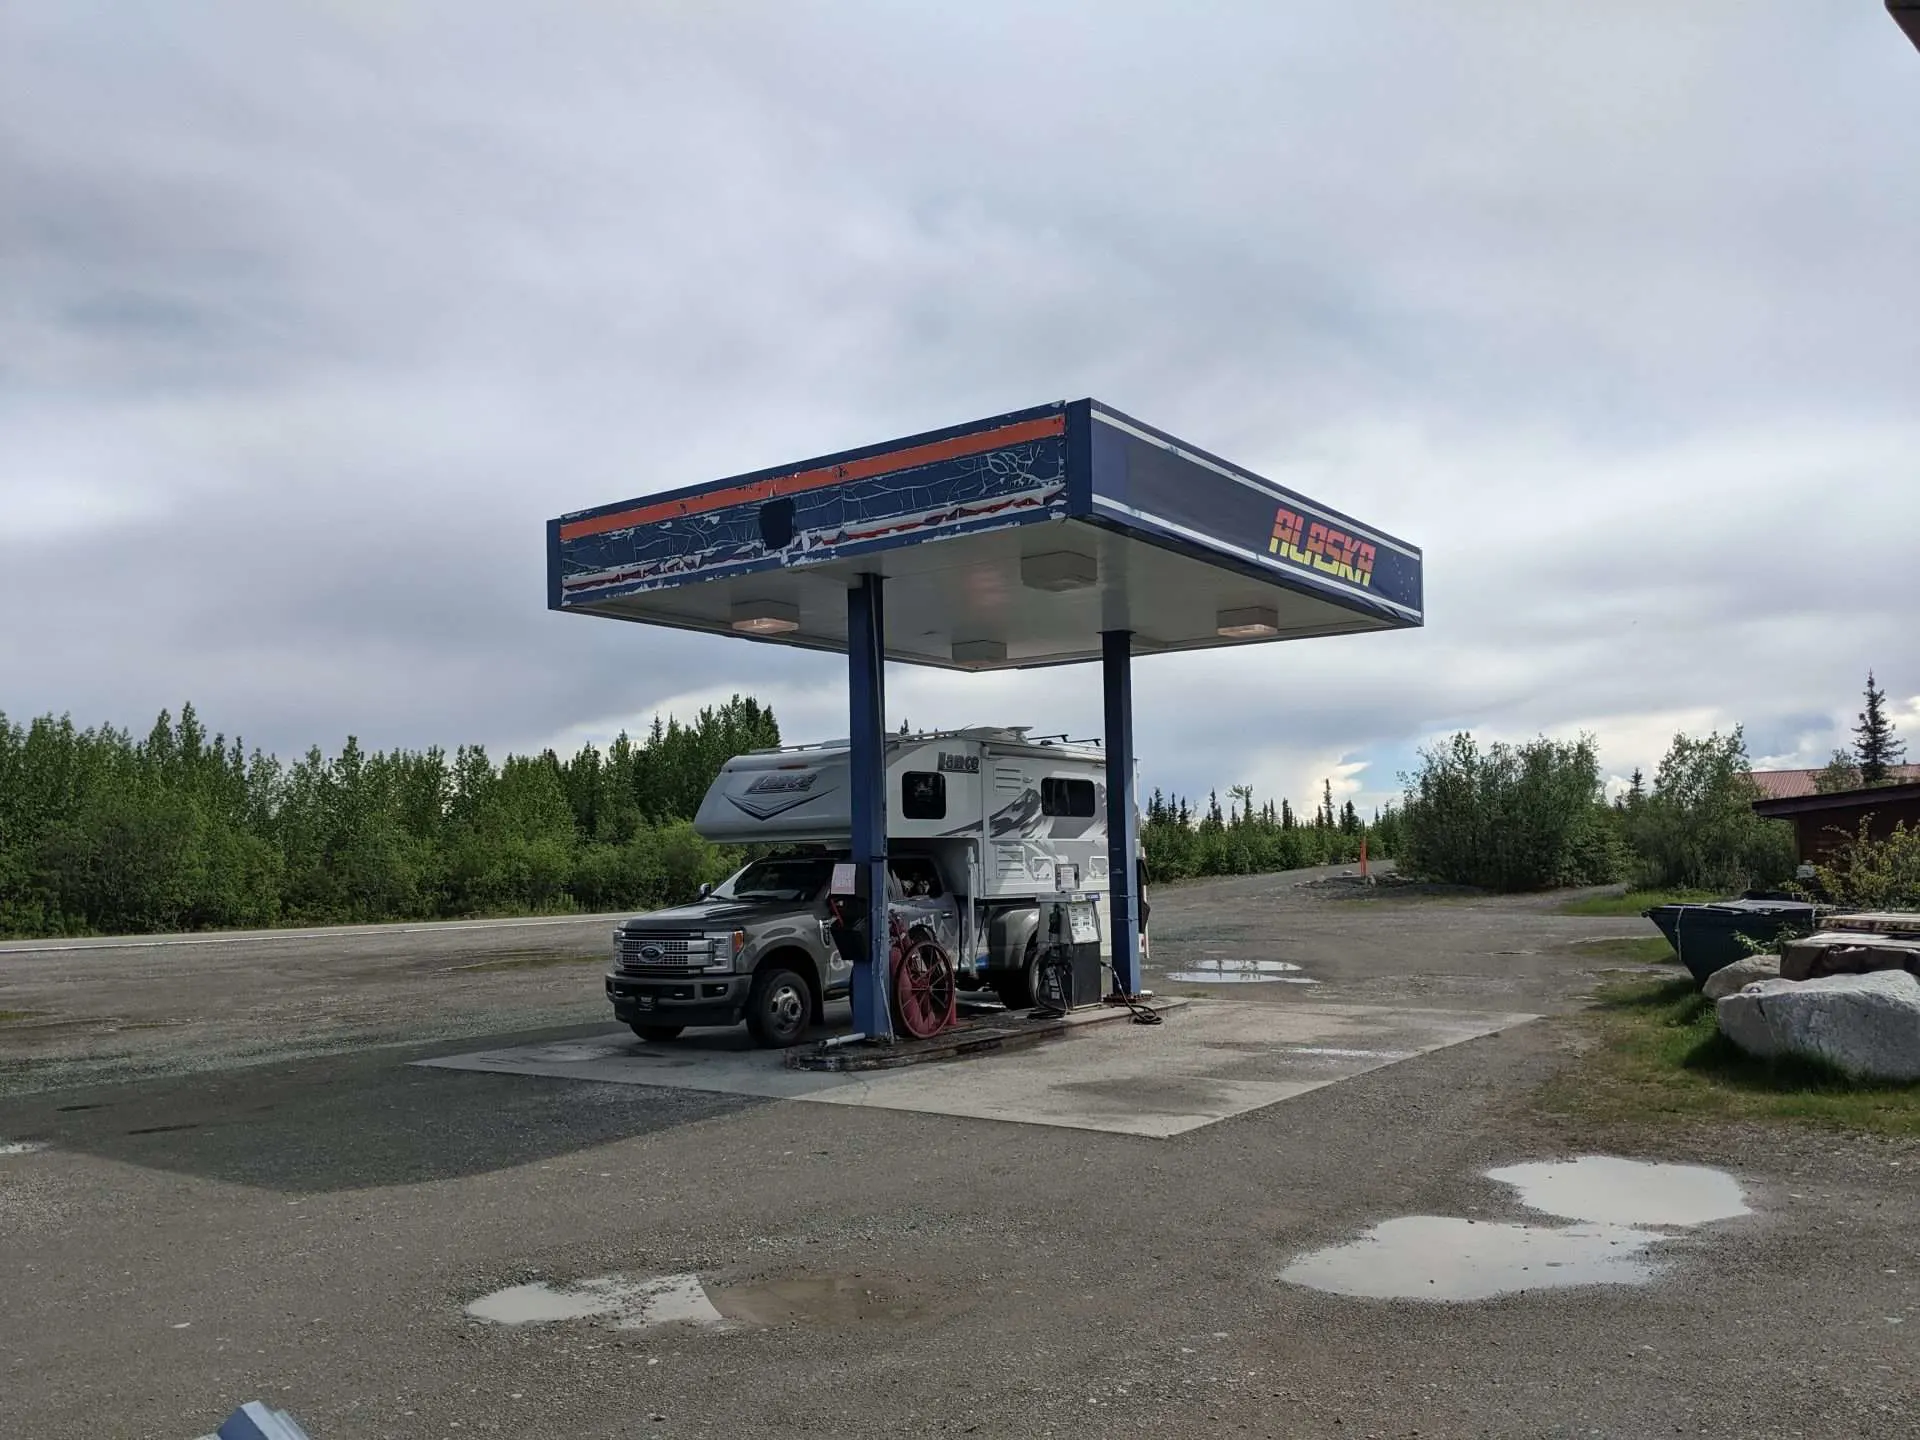 Truck camper refueling at gas station